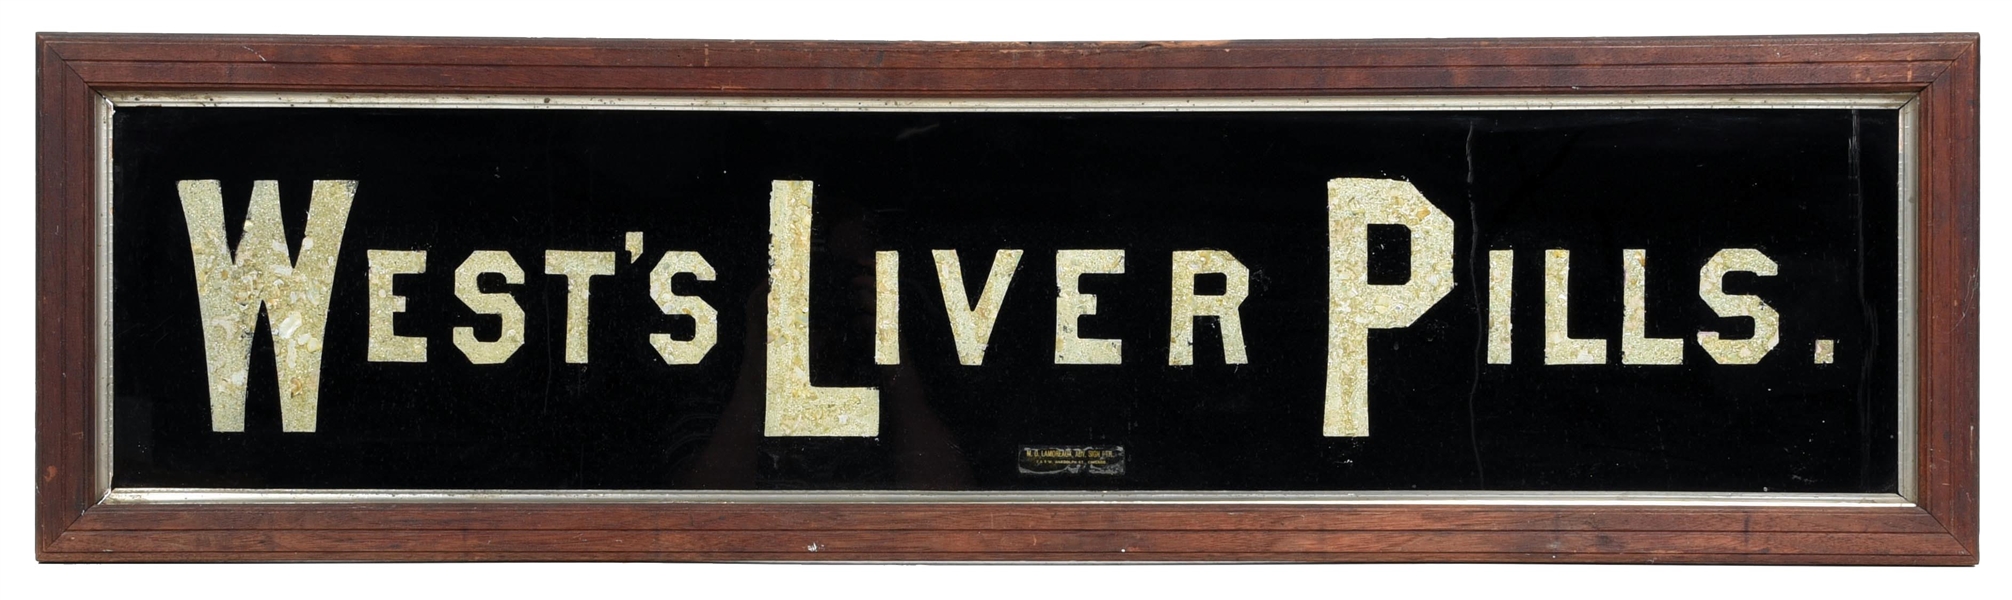 WESTS LIVER PILLS PEARL-INLAYED GLASS SIGN